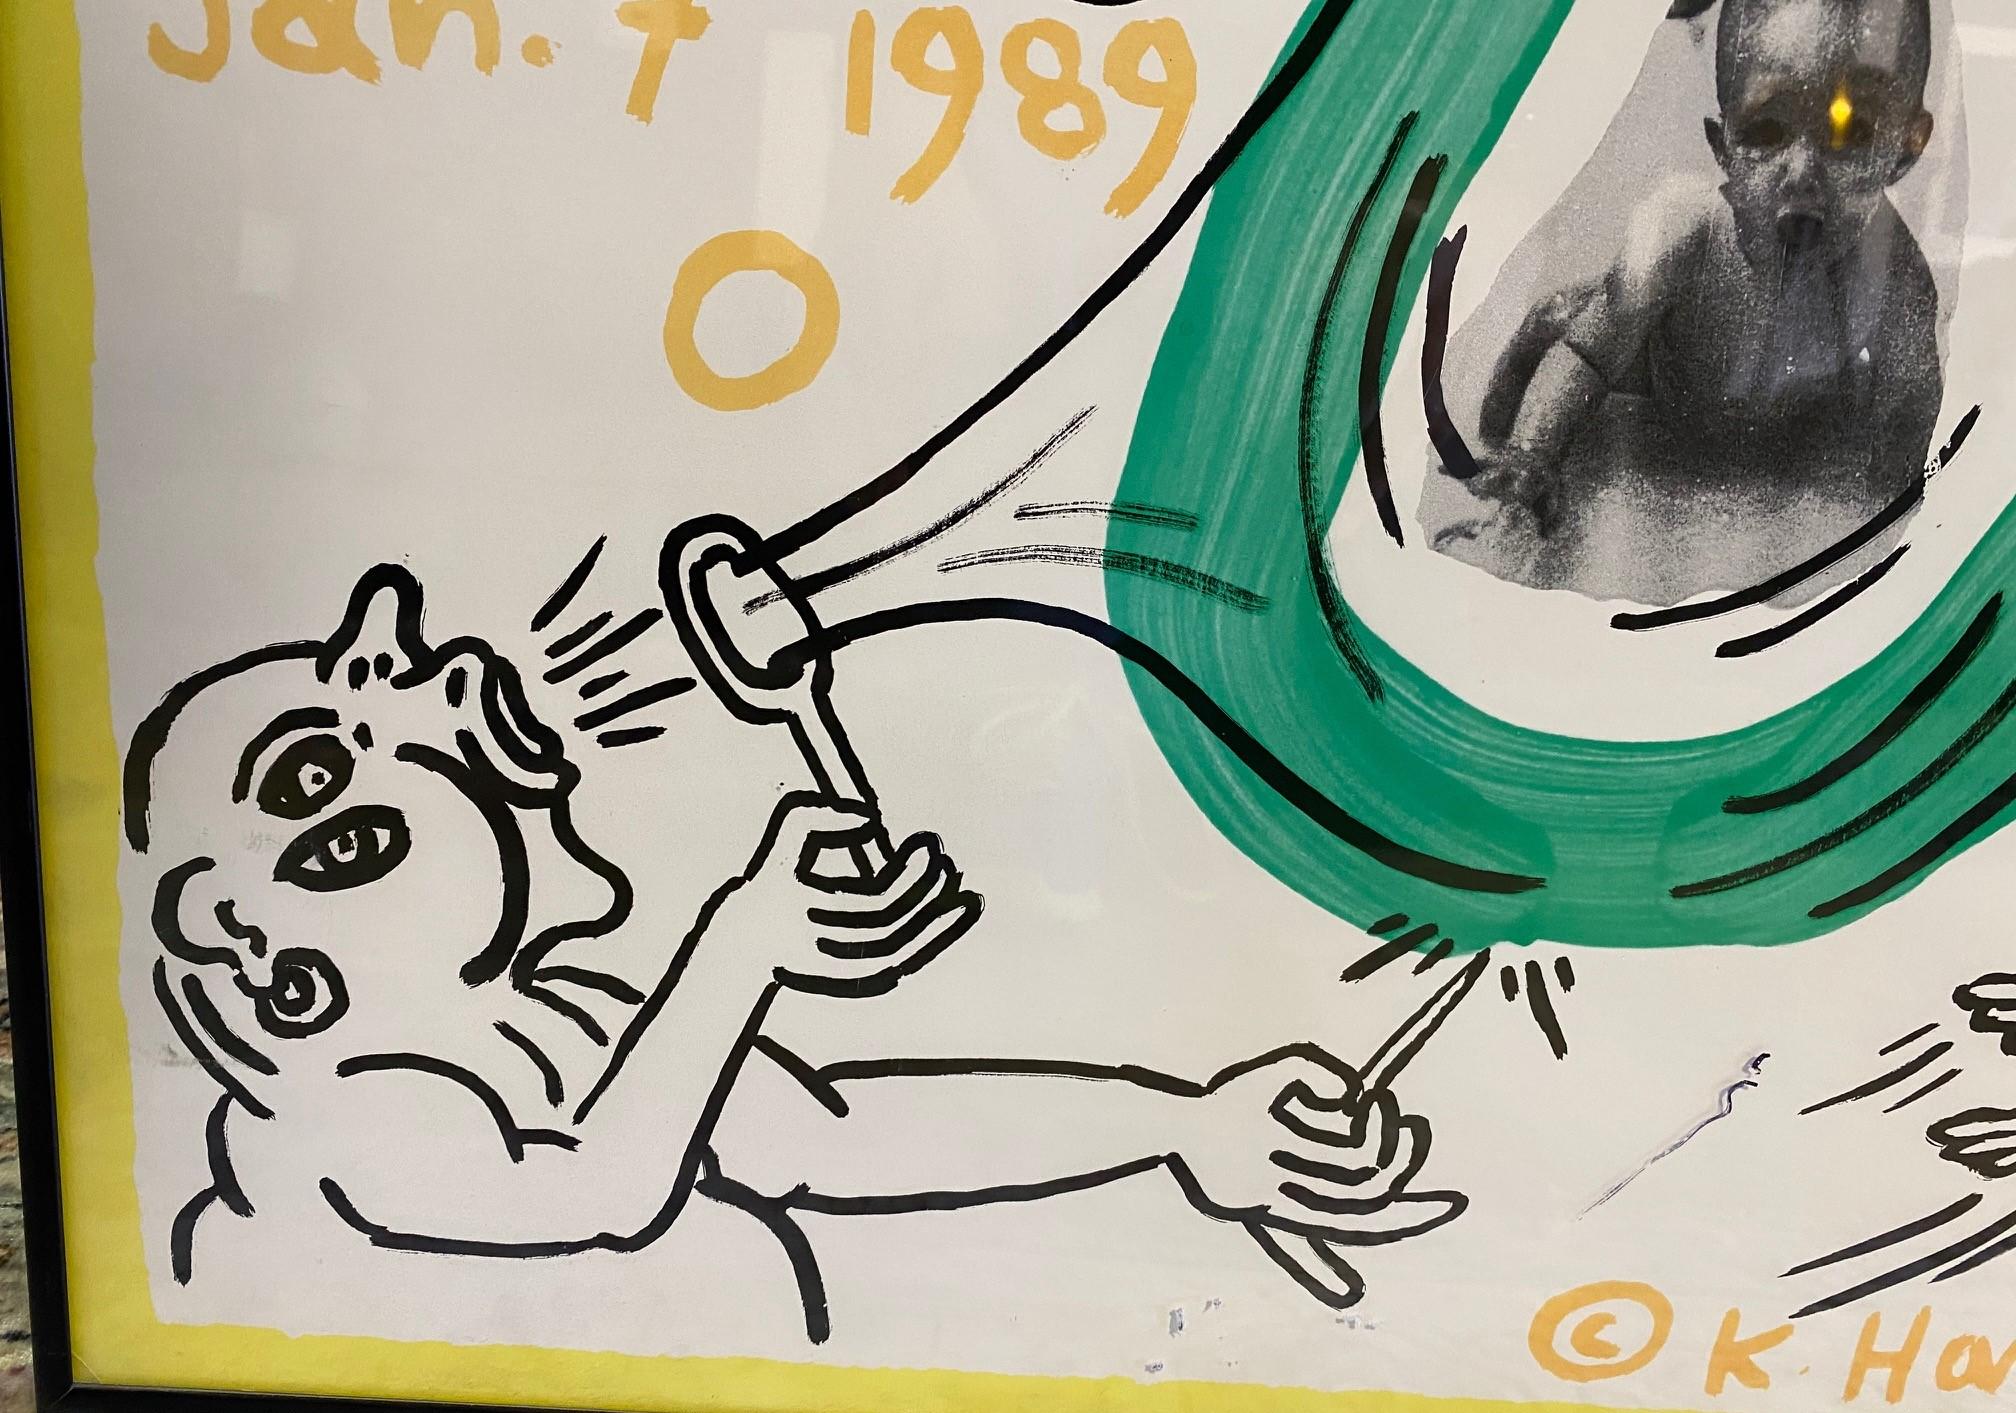 Paper Keith Haring Hand Signed Tony Shafrazi Exhibit Poster with Original Drawing 1989